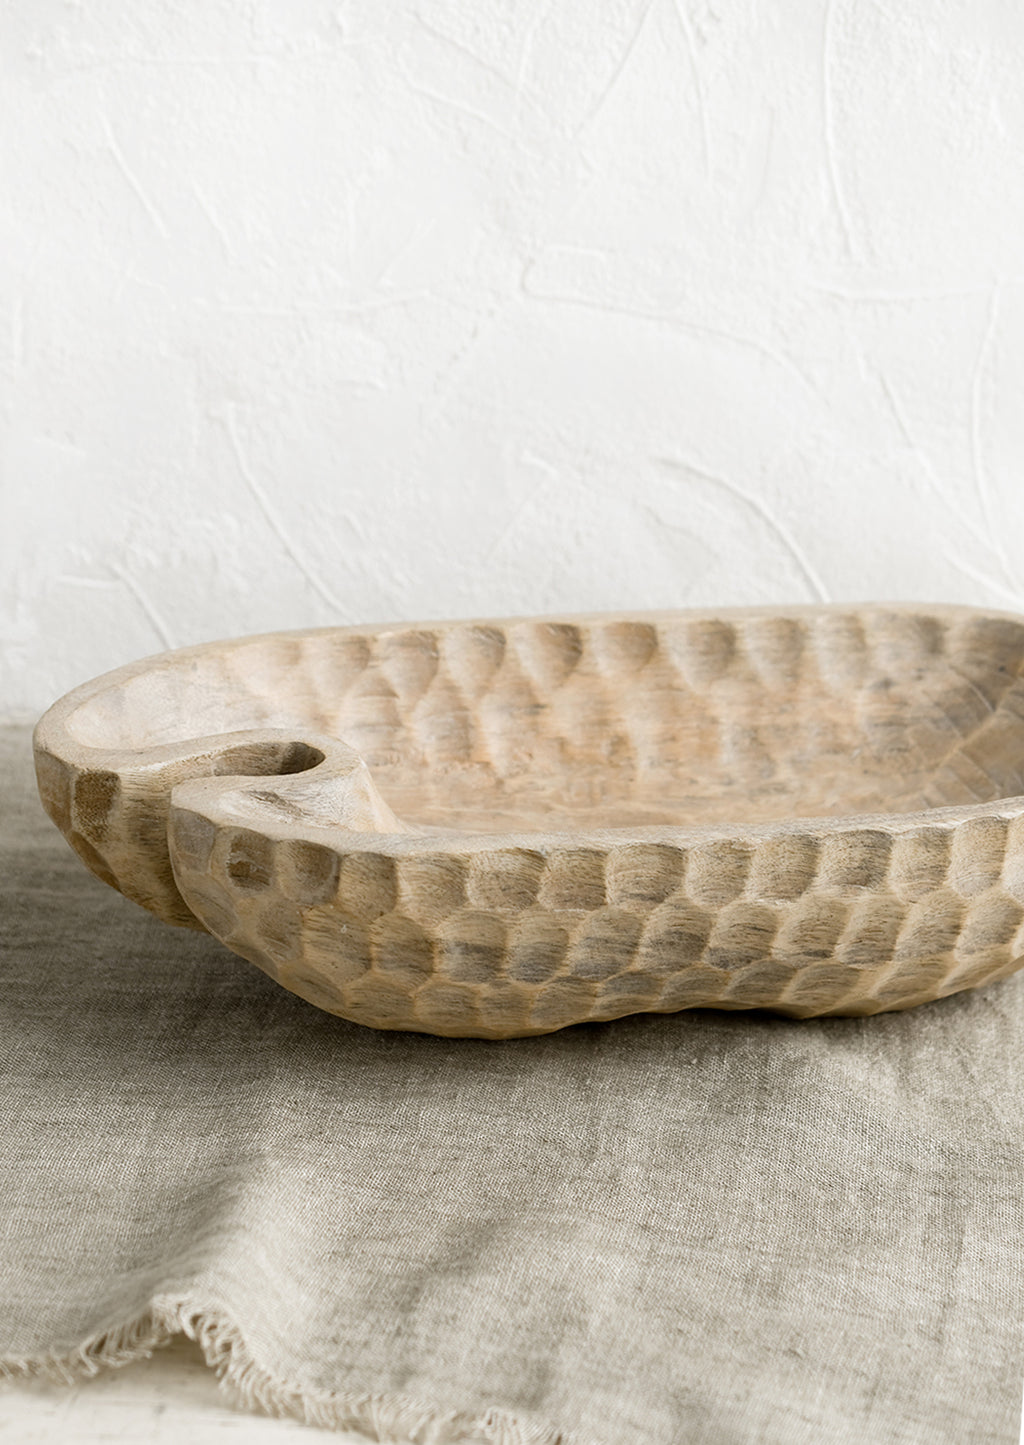 1: A light wooden bowl in organic, oblong shape, with notched texture.